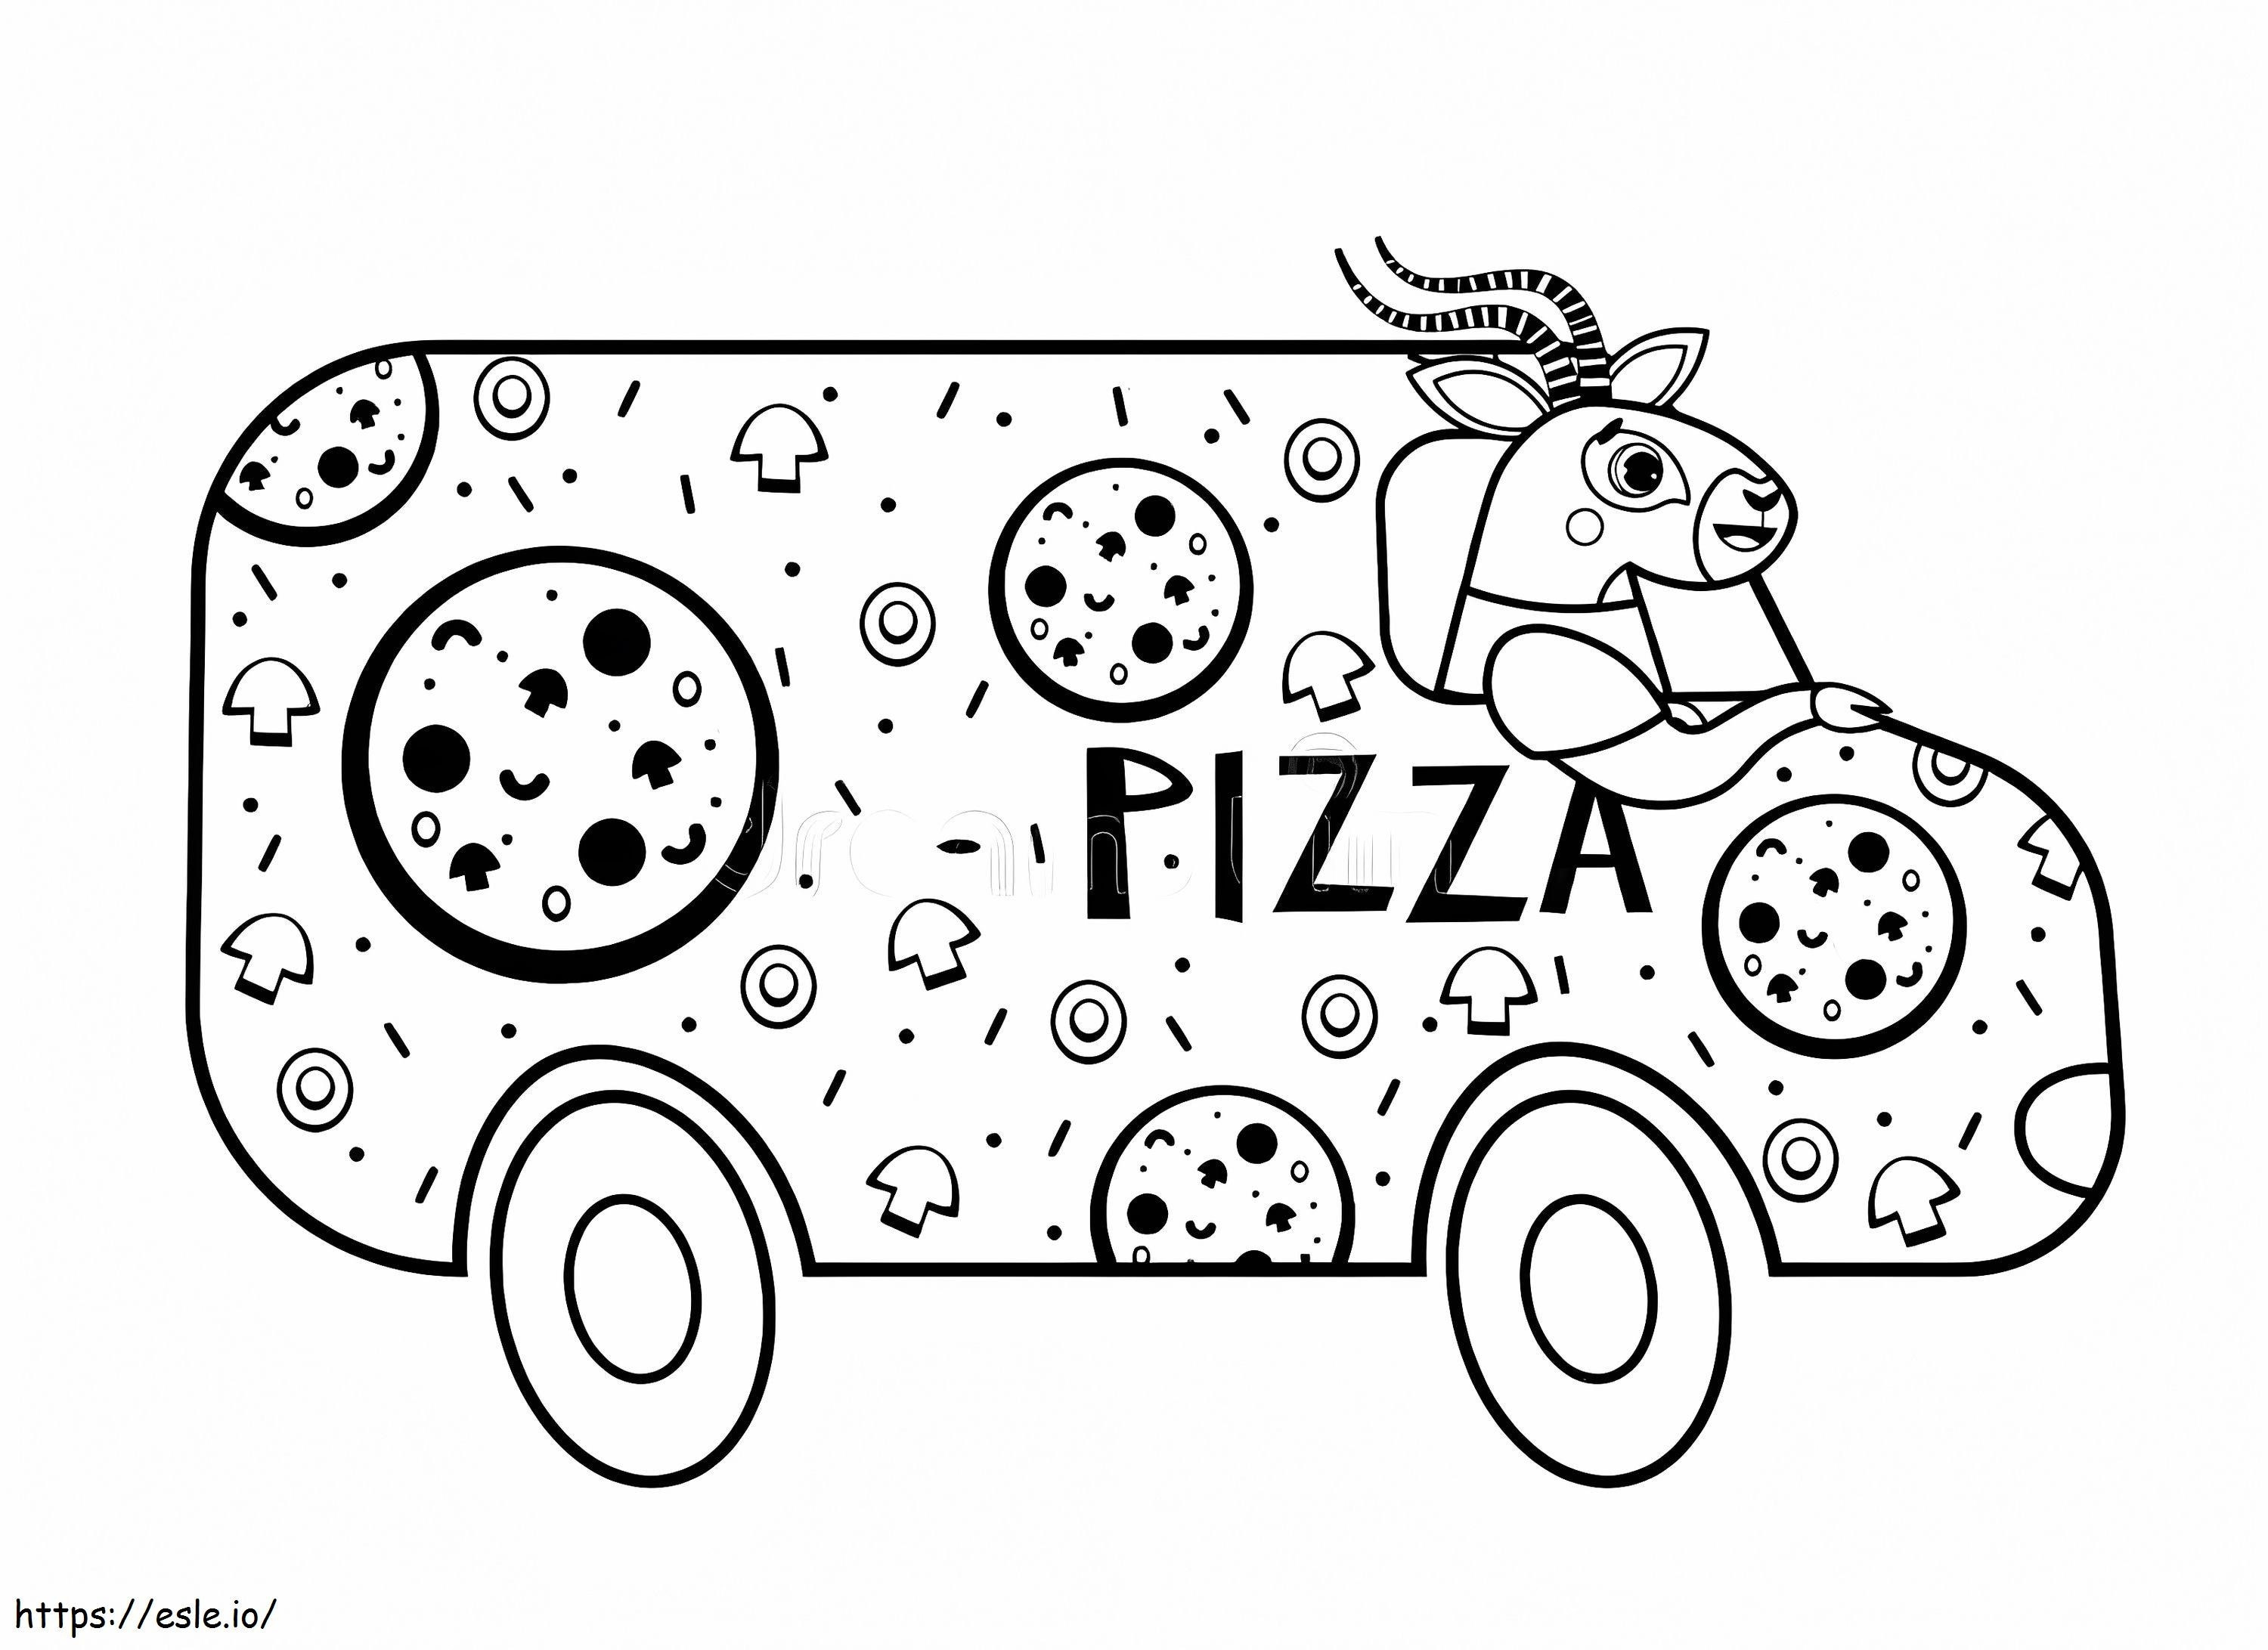 Pizza Truck coloring page